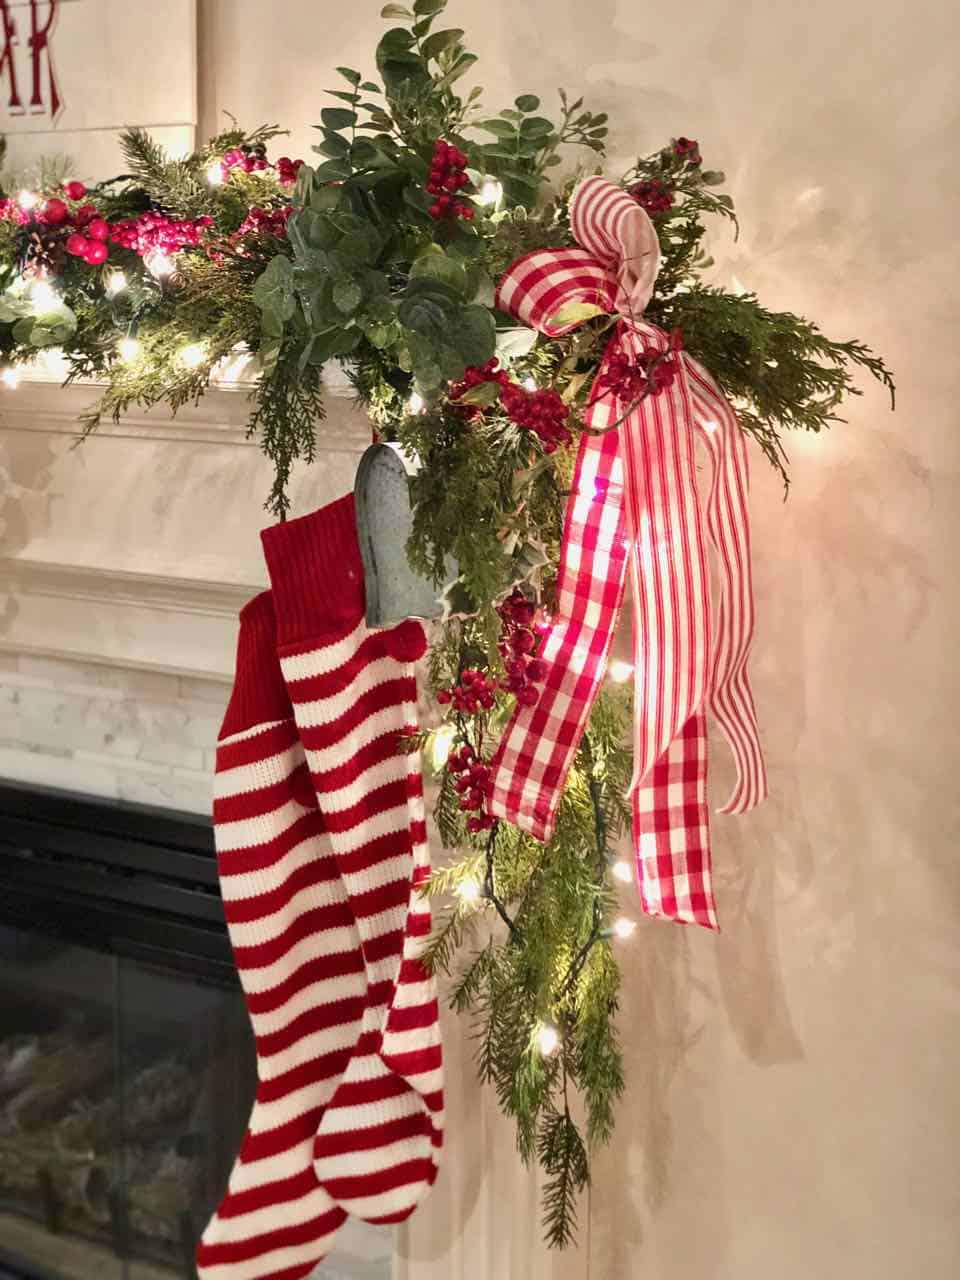 My husband says this is his favorite Christmas tree I've ever designed. Check it out! I shared lots of pictures of my Christmas decor 2018! - Design Dazzle